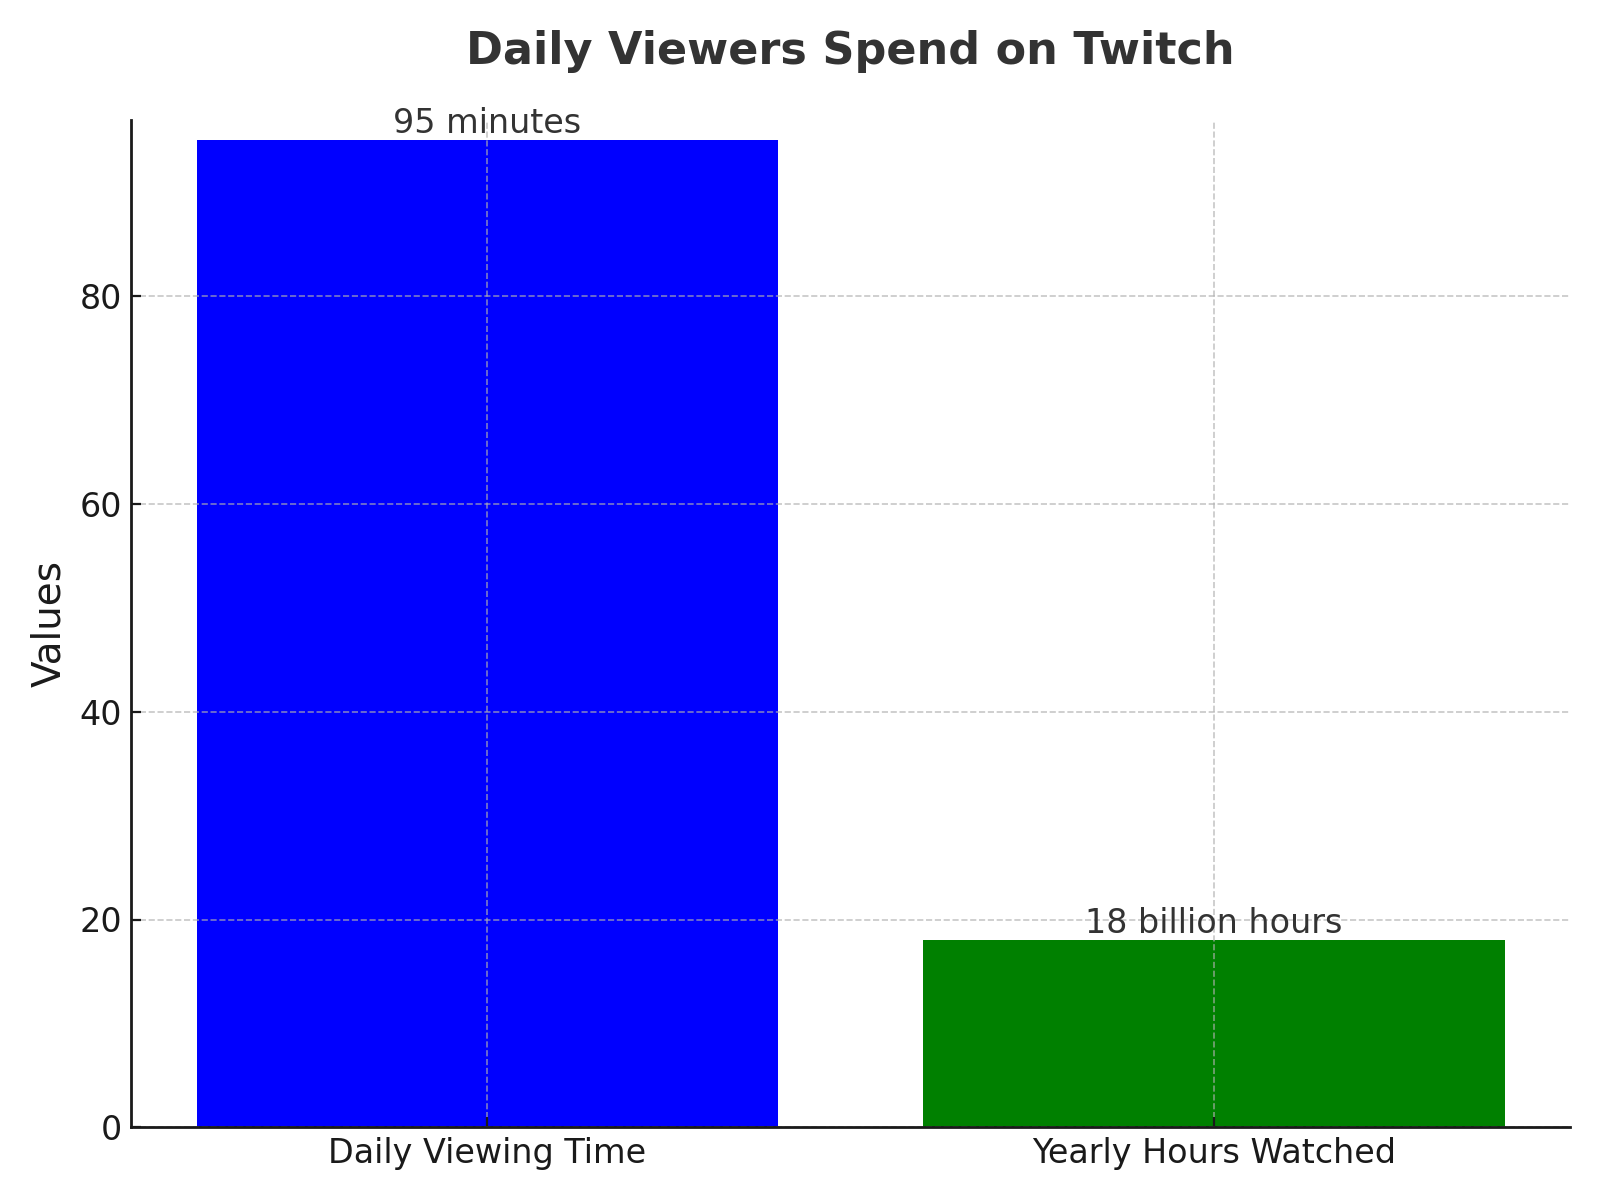 Twitch_Daily-and_Yearly_Viewing-spending-time